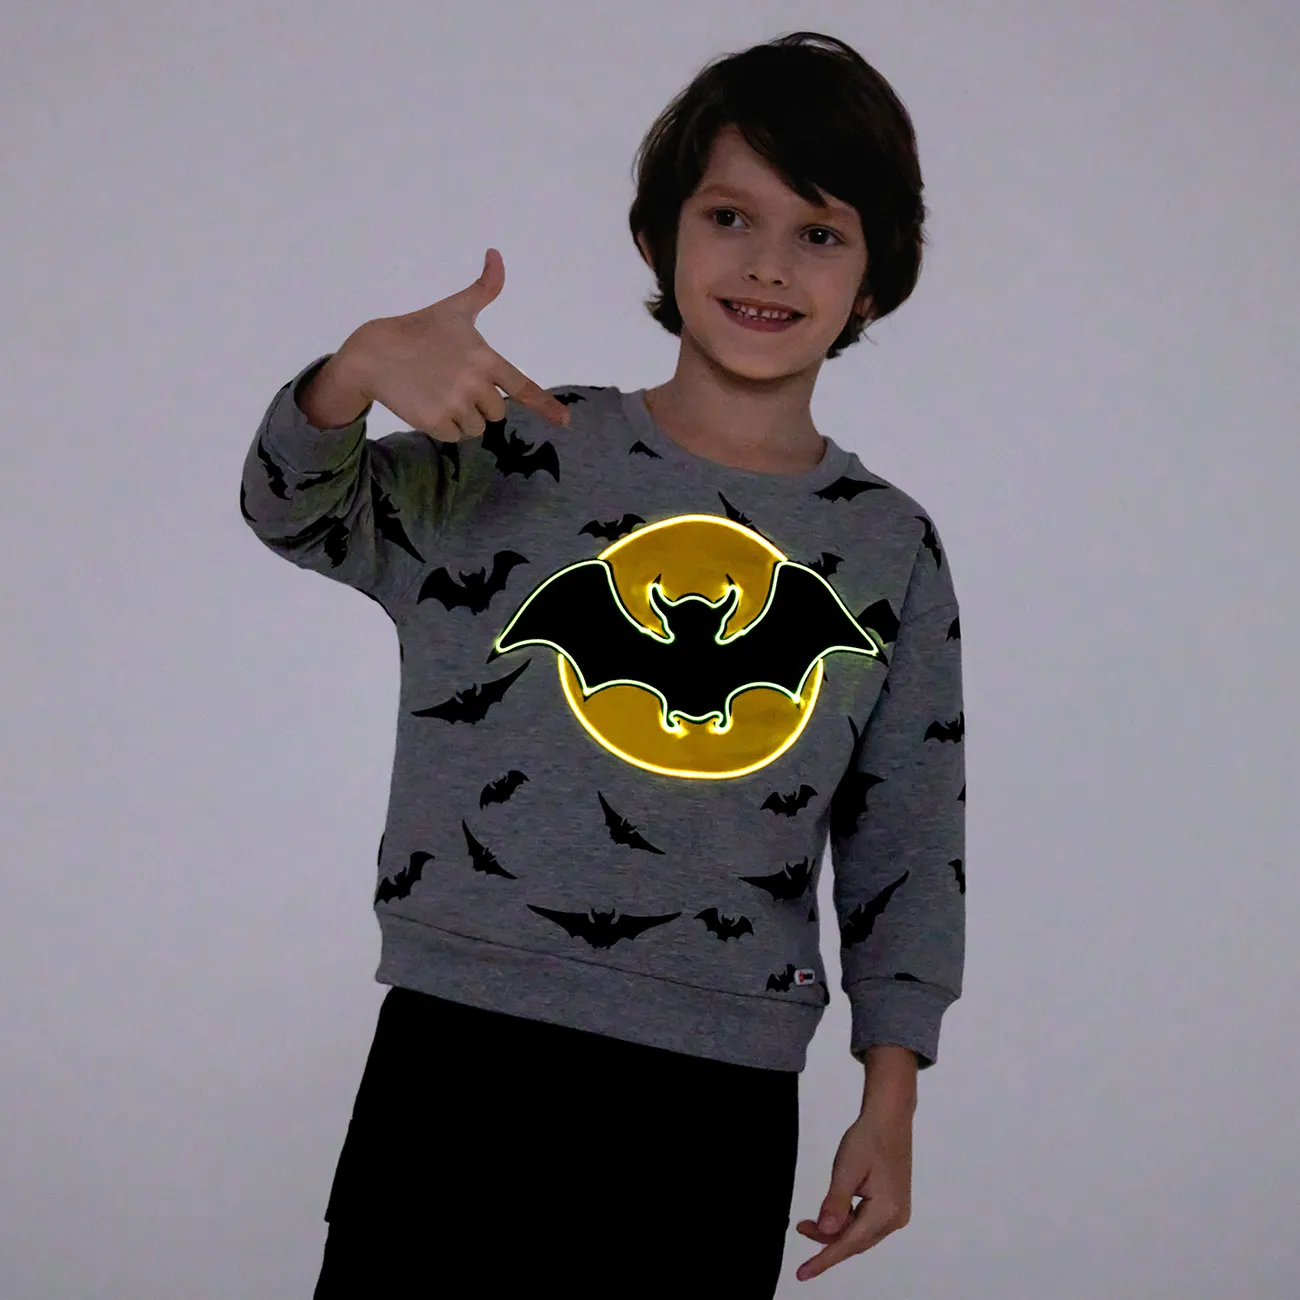 Go-Glow Illuminating Sweatshirt with Light Up Bat Pattern Including Controller (Built-In Battery) Grey big image 1